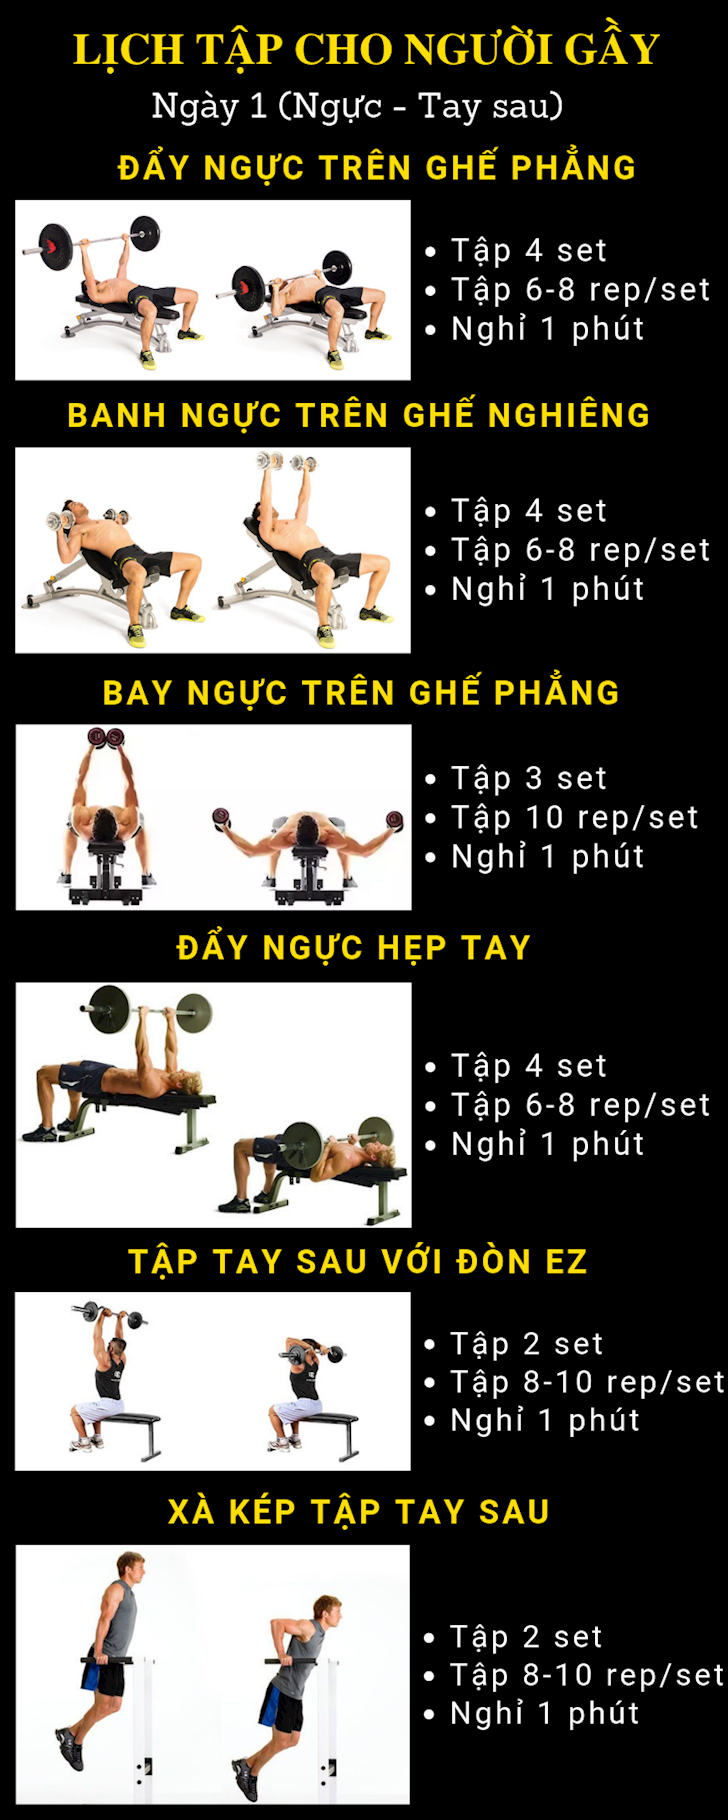 7 NGAY TAP LUYEN: Lich tap cho nguoi gay